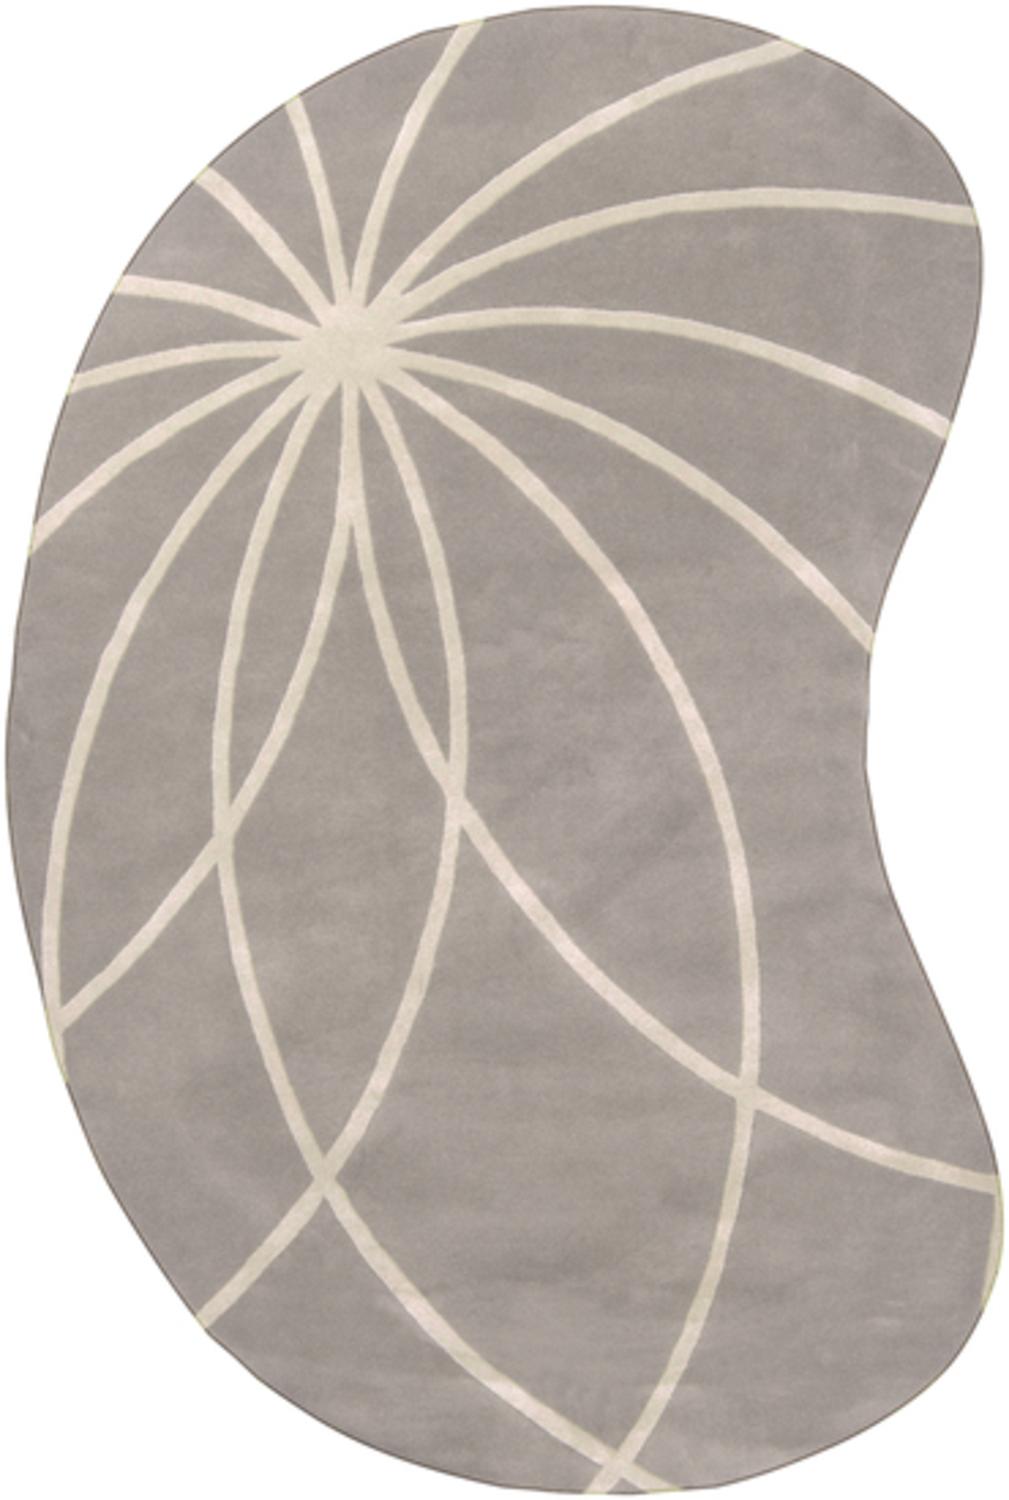 Diva At Home 8' x 10' Plasma Elektra White and Gray Hand Tufted Wool Kidney-Shaped Area Rug